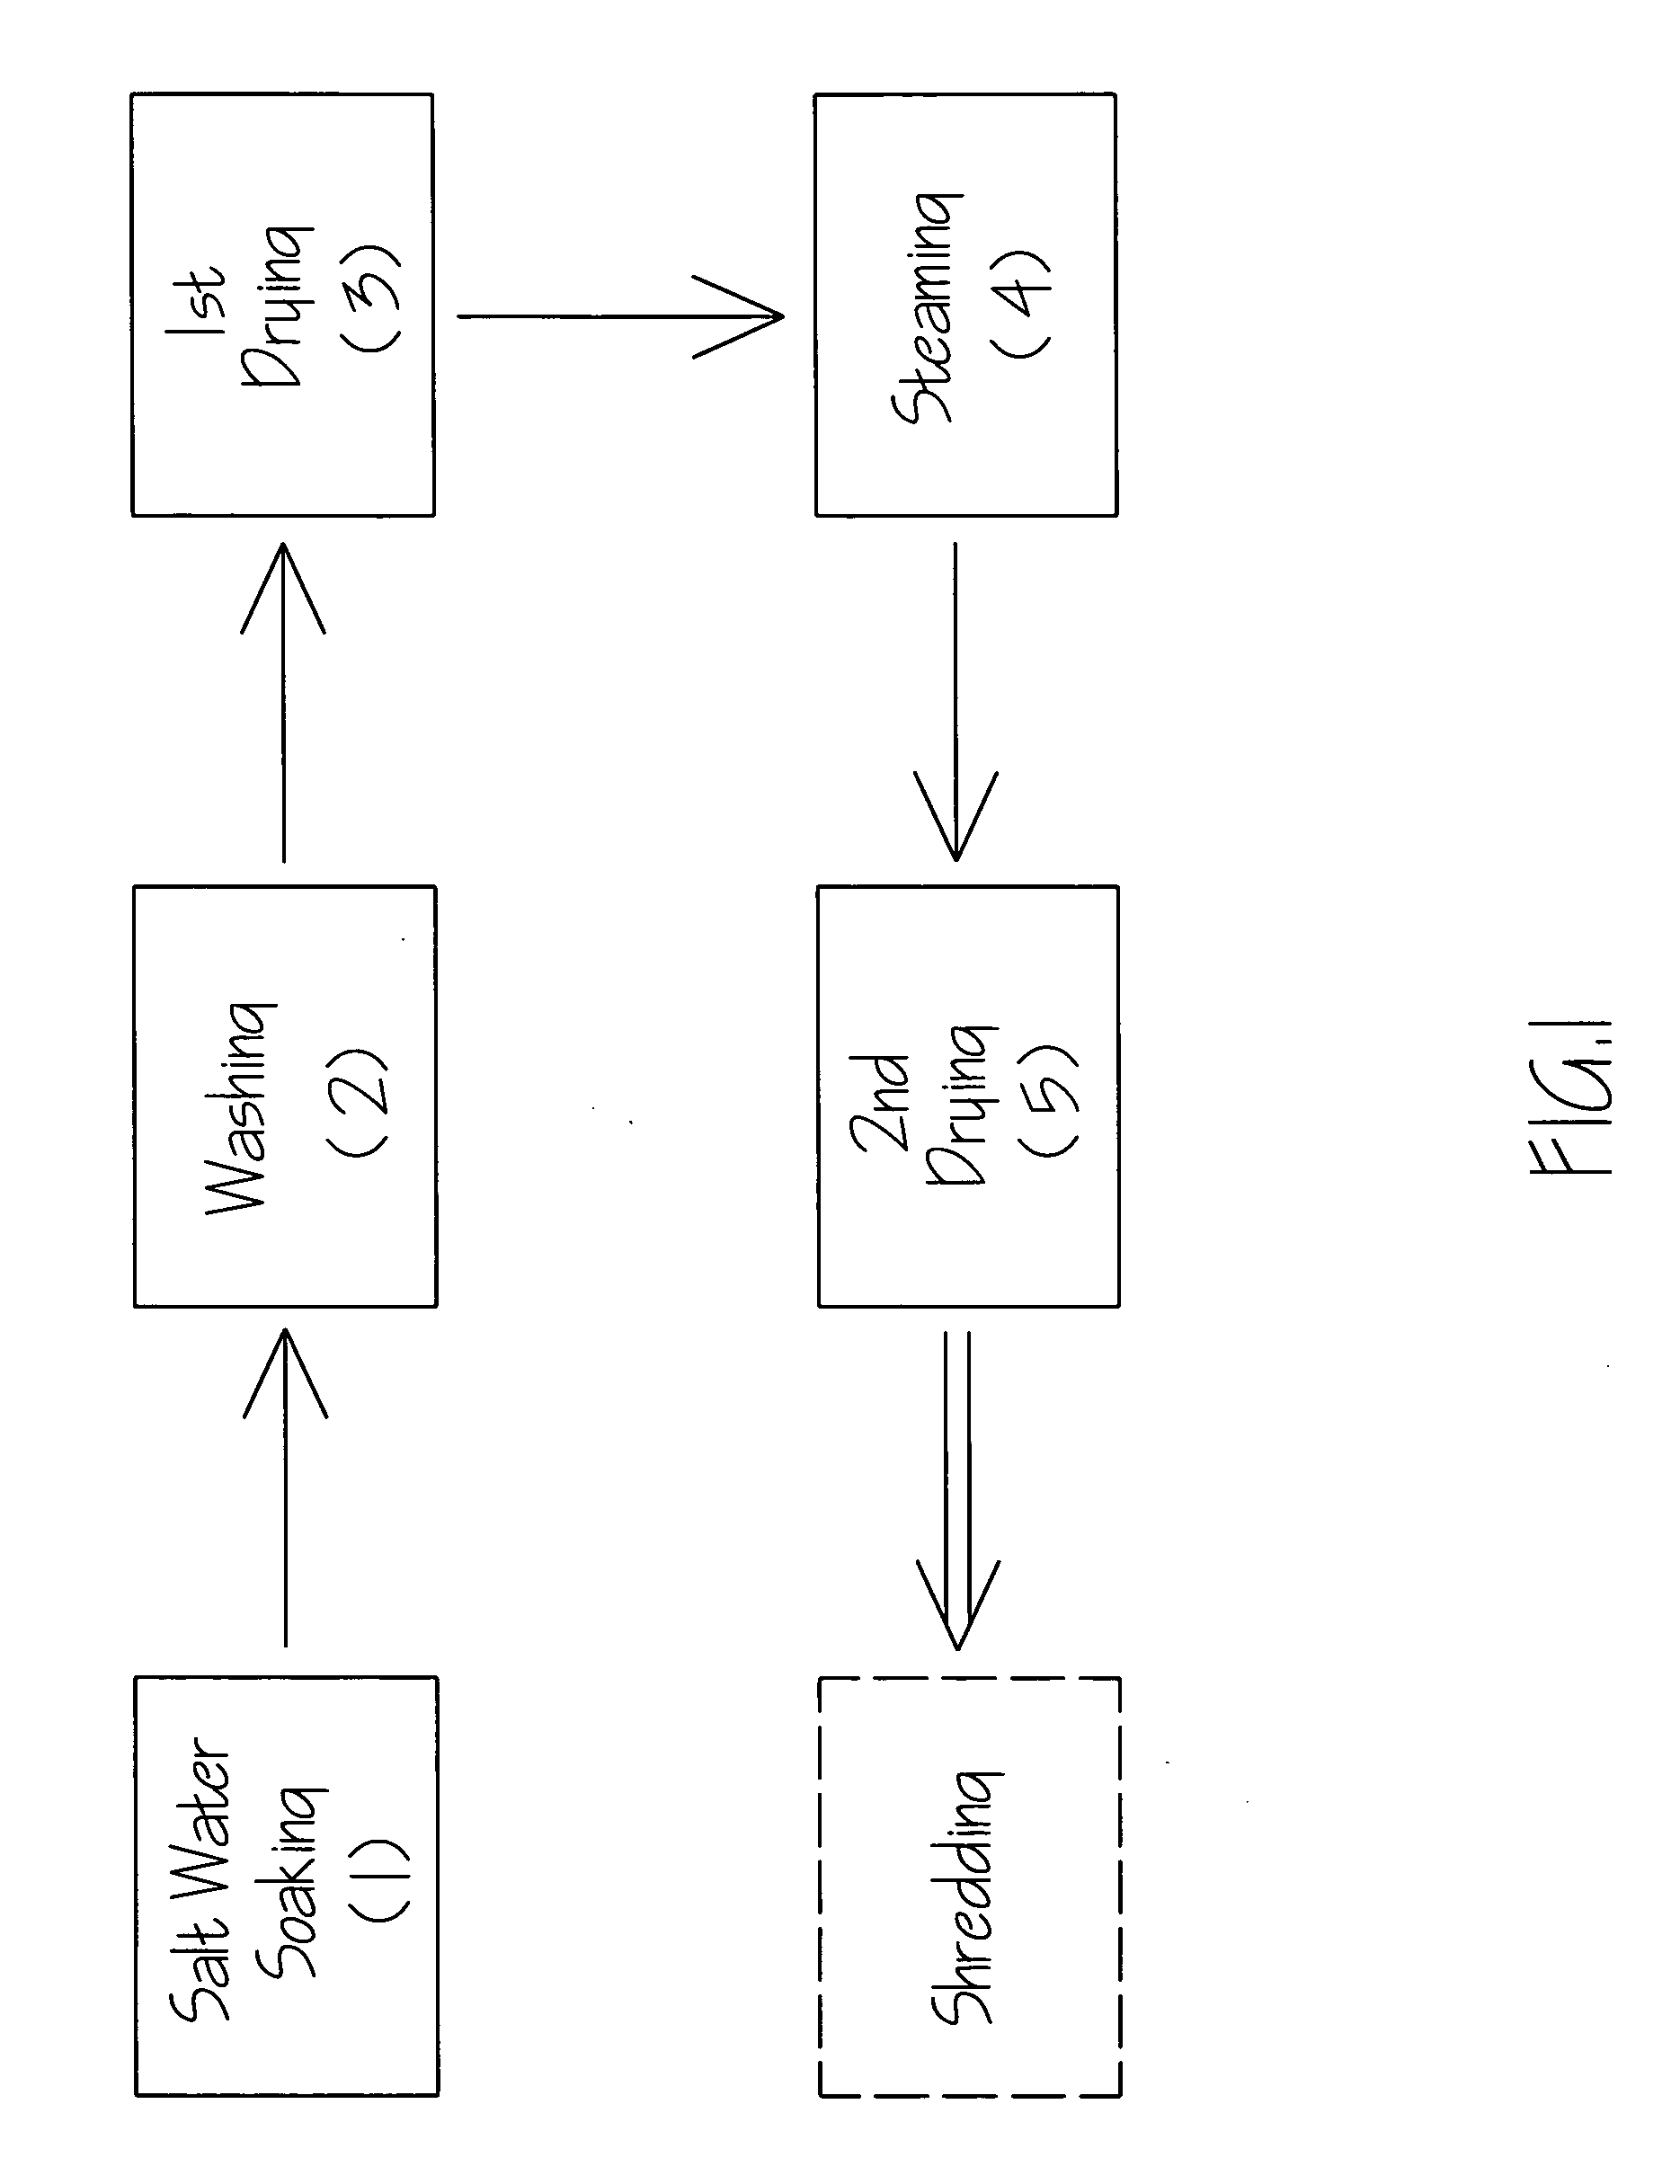 Process for manufacturing low nicotine tabacco leaf substitute